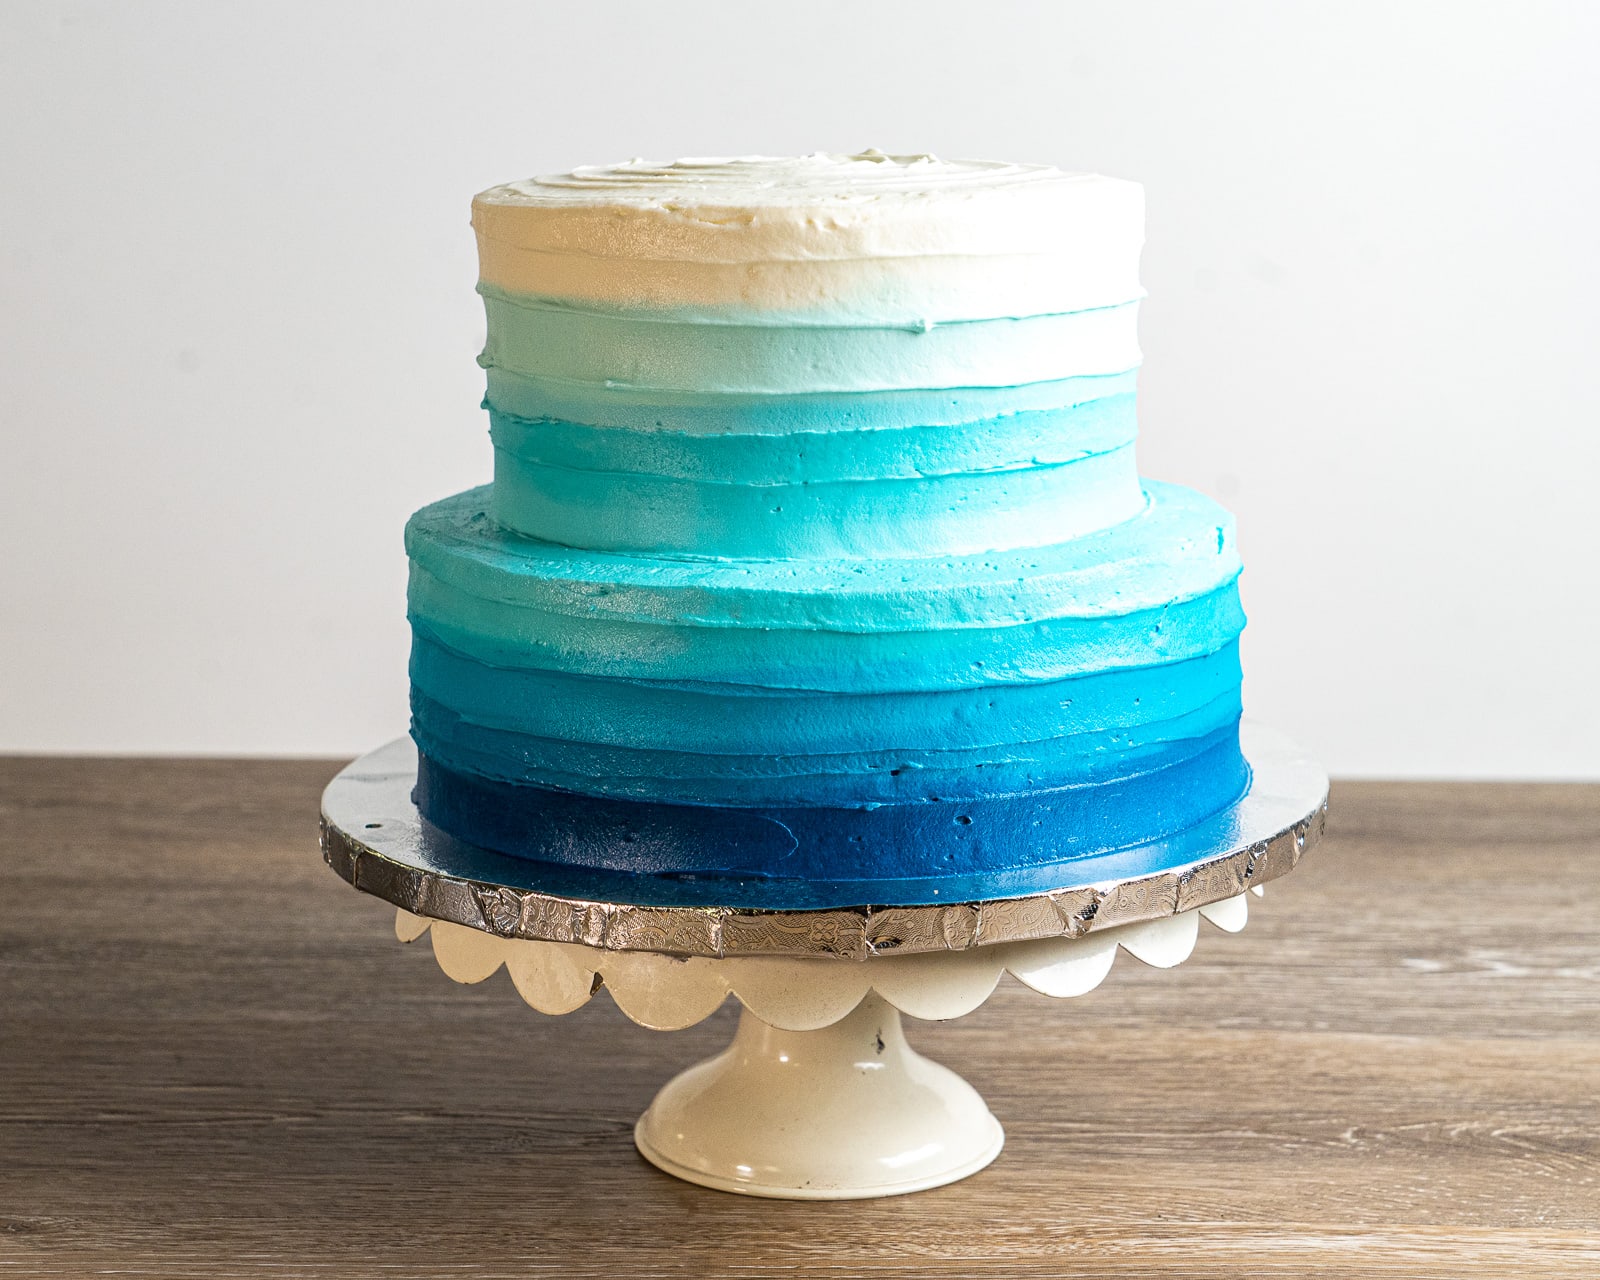 This double-height, stacked cake (10" and 8" cakes) features elegant blue ombré buttercream frosting.